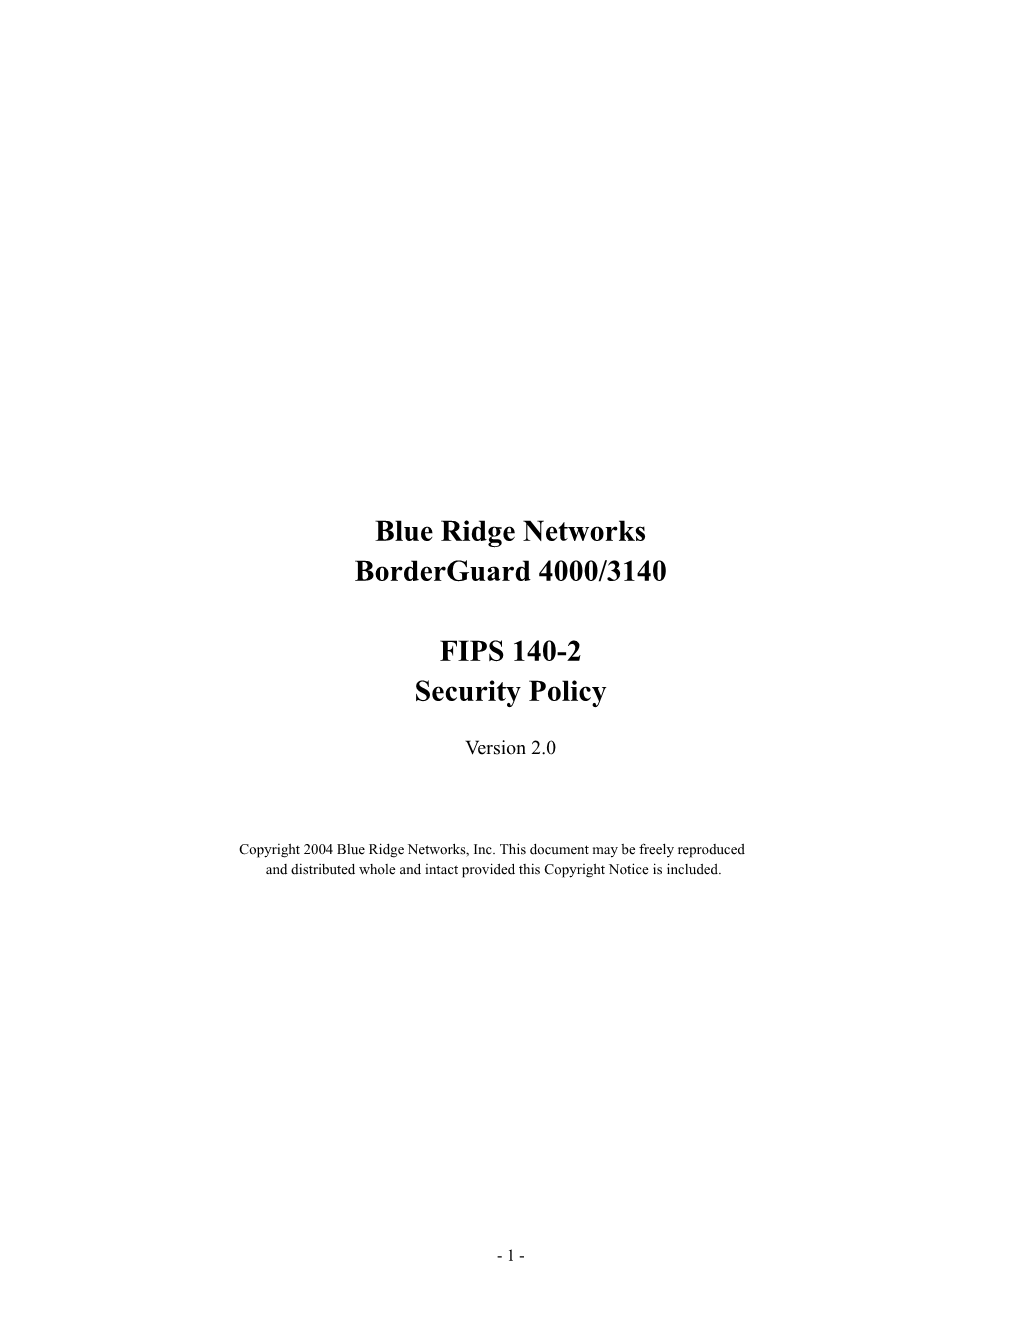 Blue Ridge Networks Borderguard 4000/3140 FIPS 140-2 Security Policy